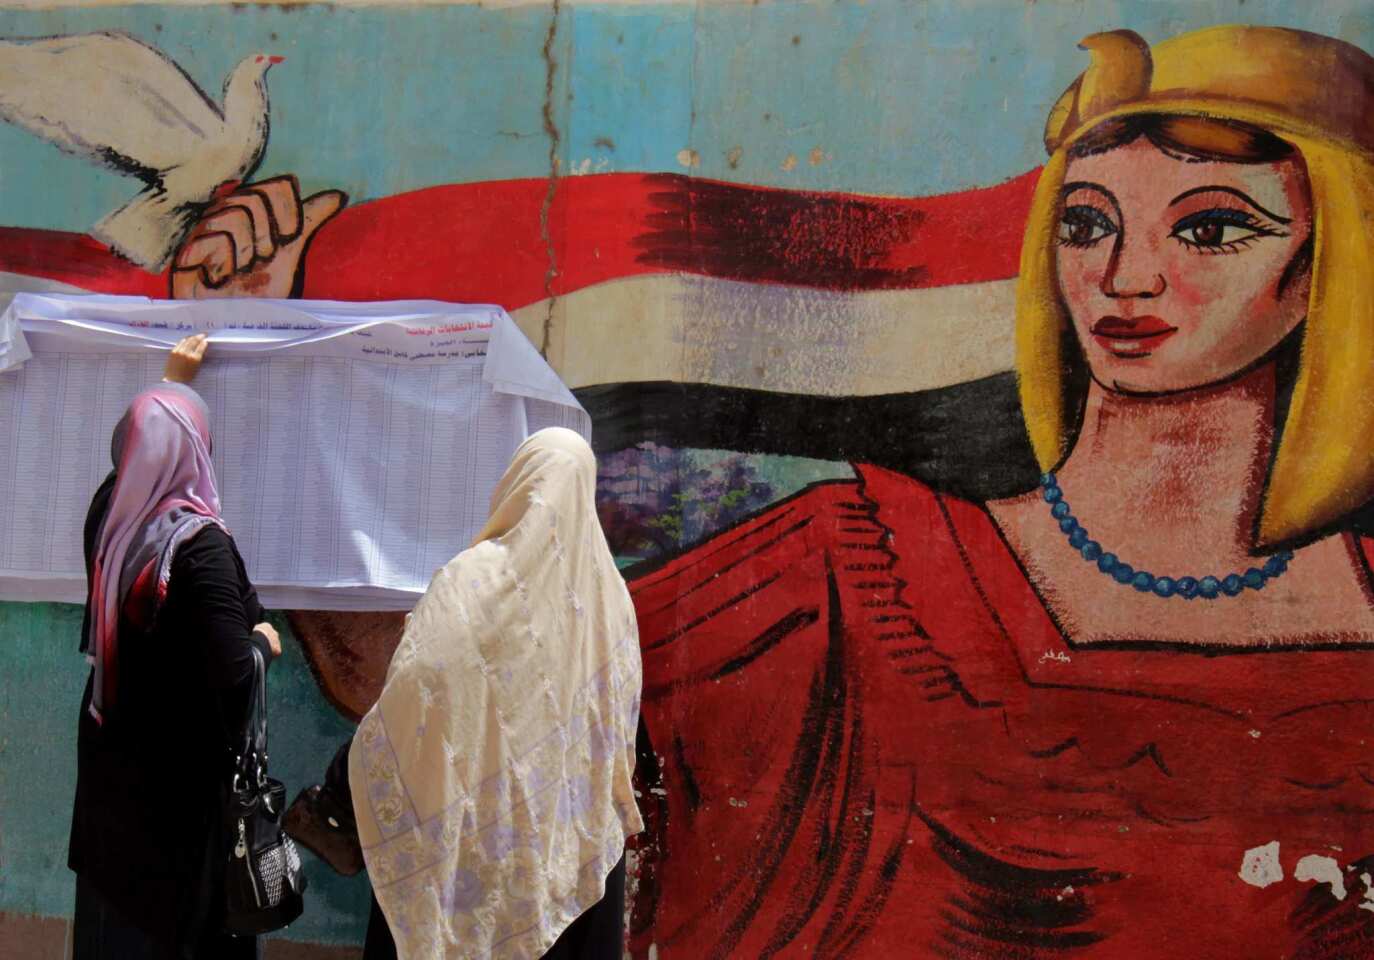 Egyptian women check for their names in the voters list before casting their ballots in the first round of presidential elections at a polling station in Cairo.